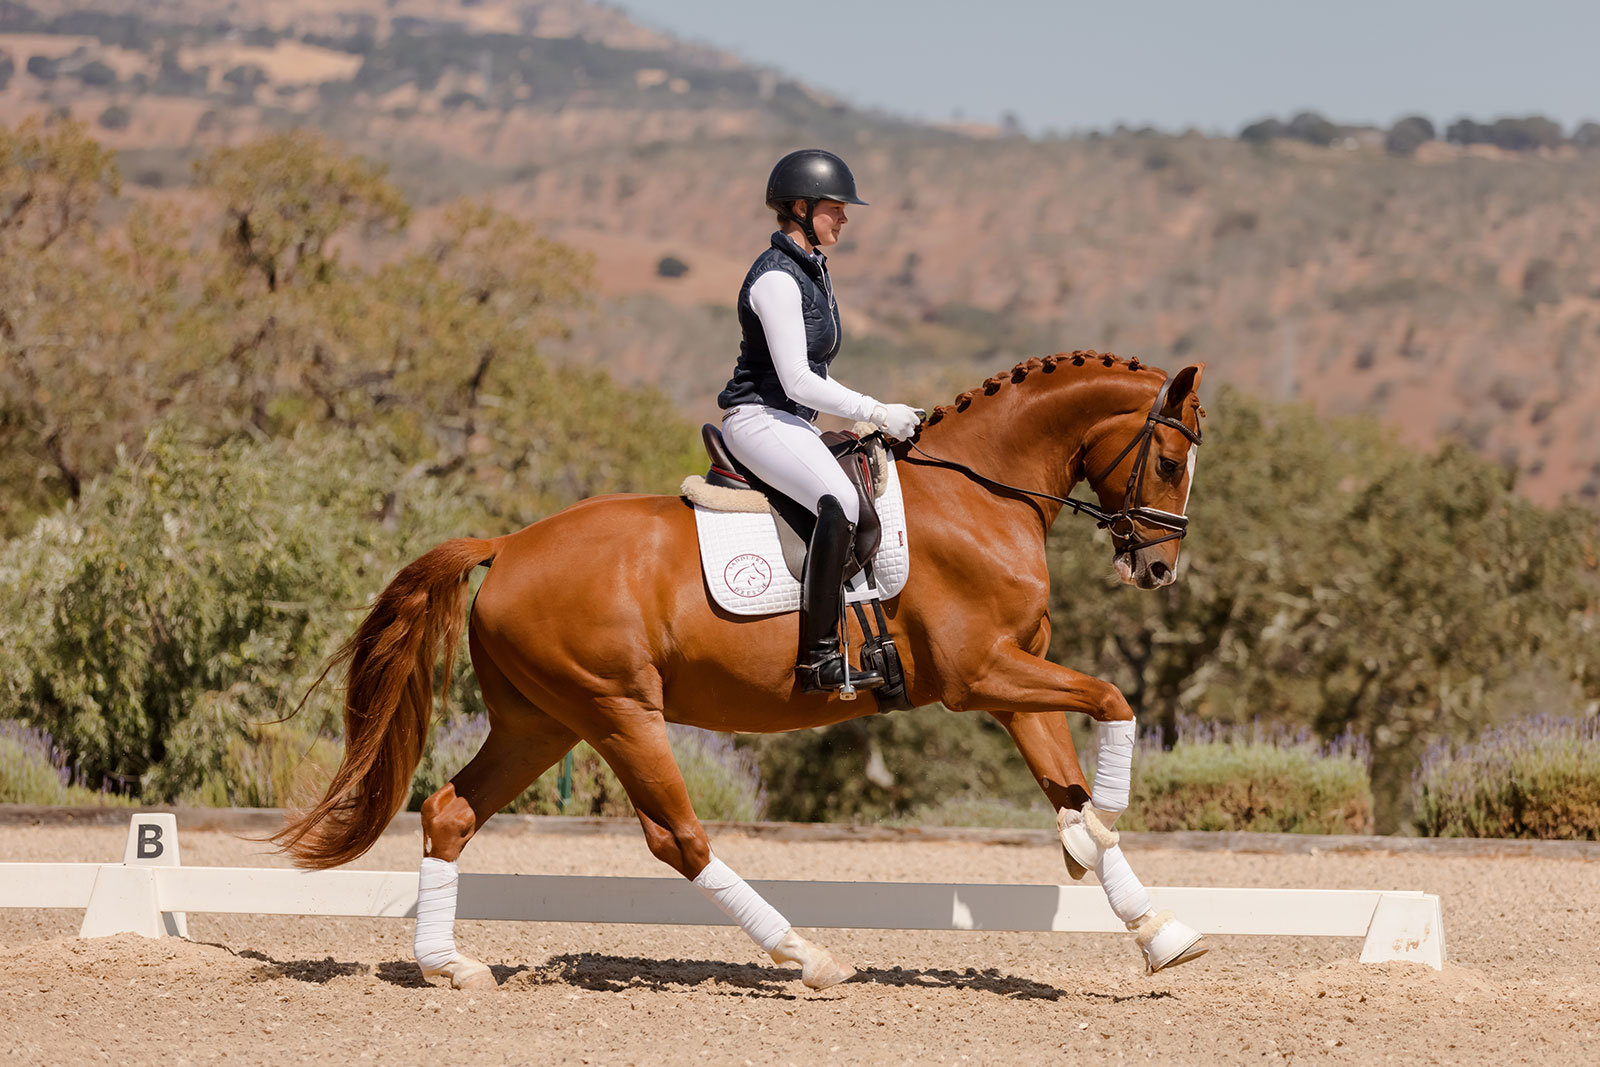 chestnut horse cantering in arena